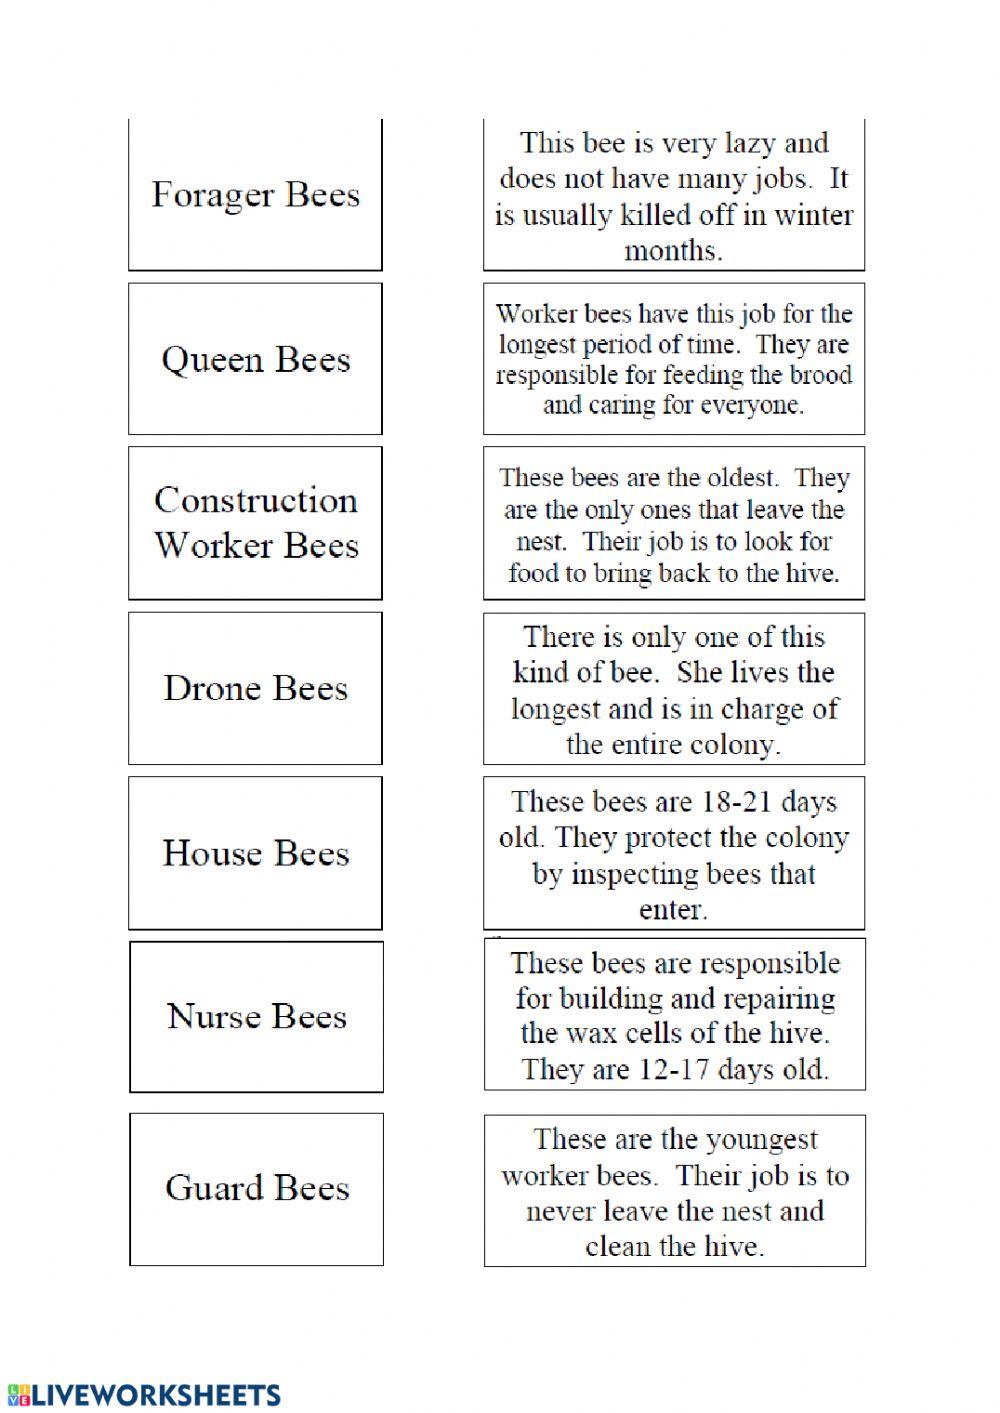 Kinds of bees